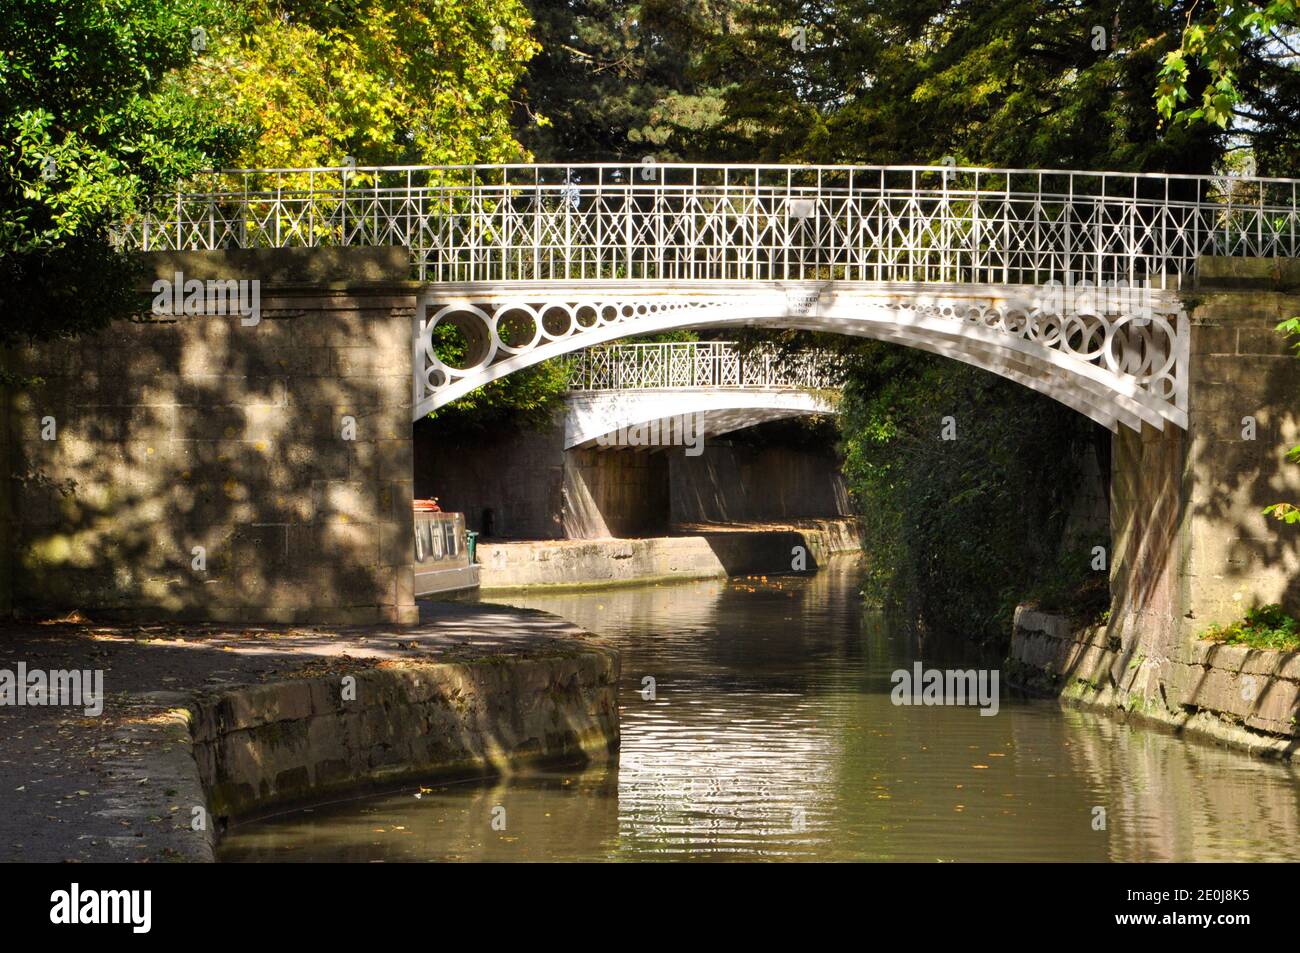 The cast iron bridges designed by the architect John Rennie over the Kennet and Avon canal as it passe through the Sydney Gradens in city of Bath.Some Stock Photo